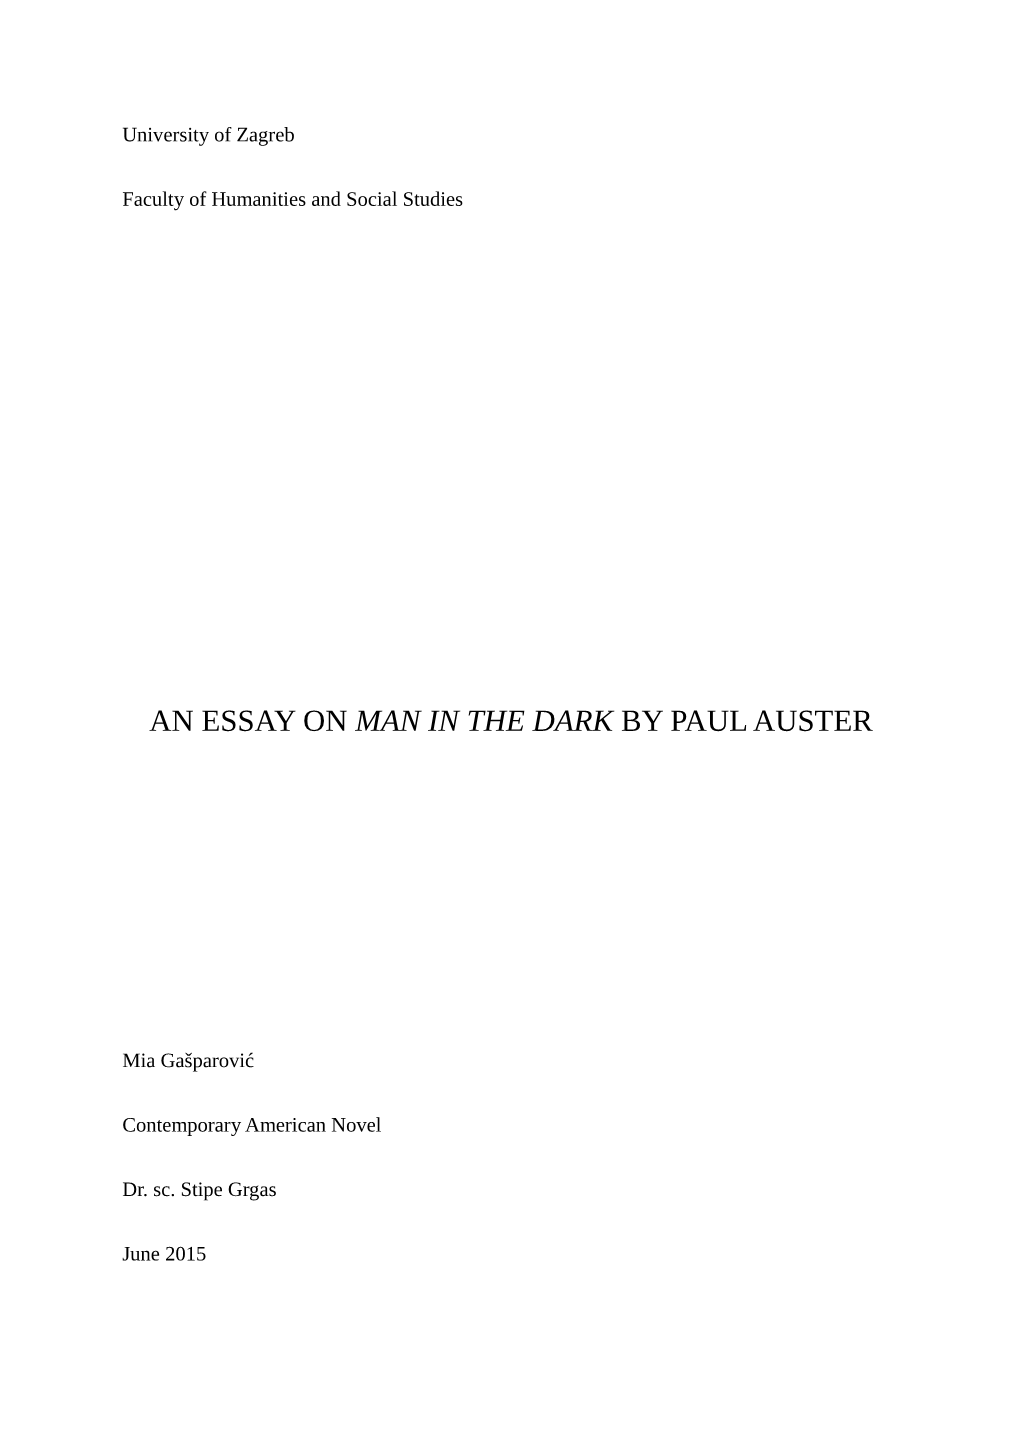 An Essay on Man in the Dark by Paul Auster